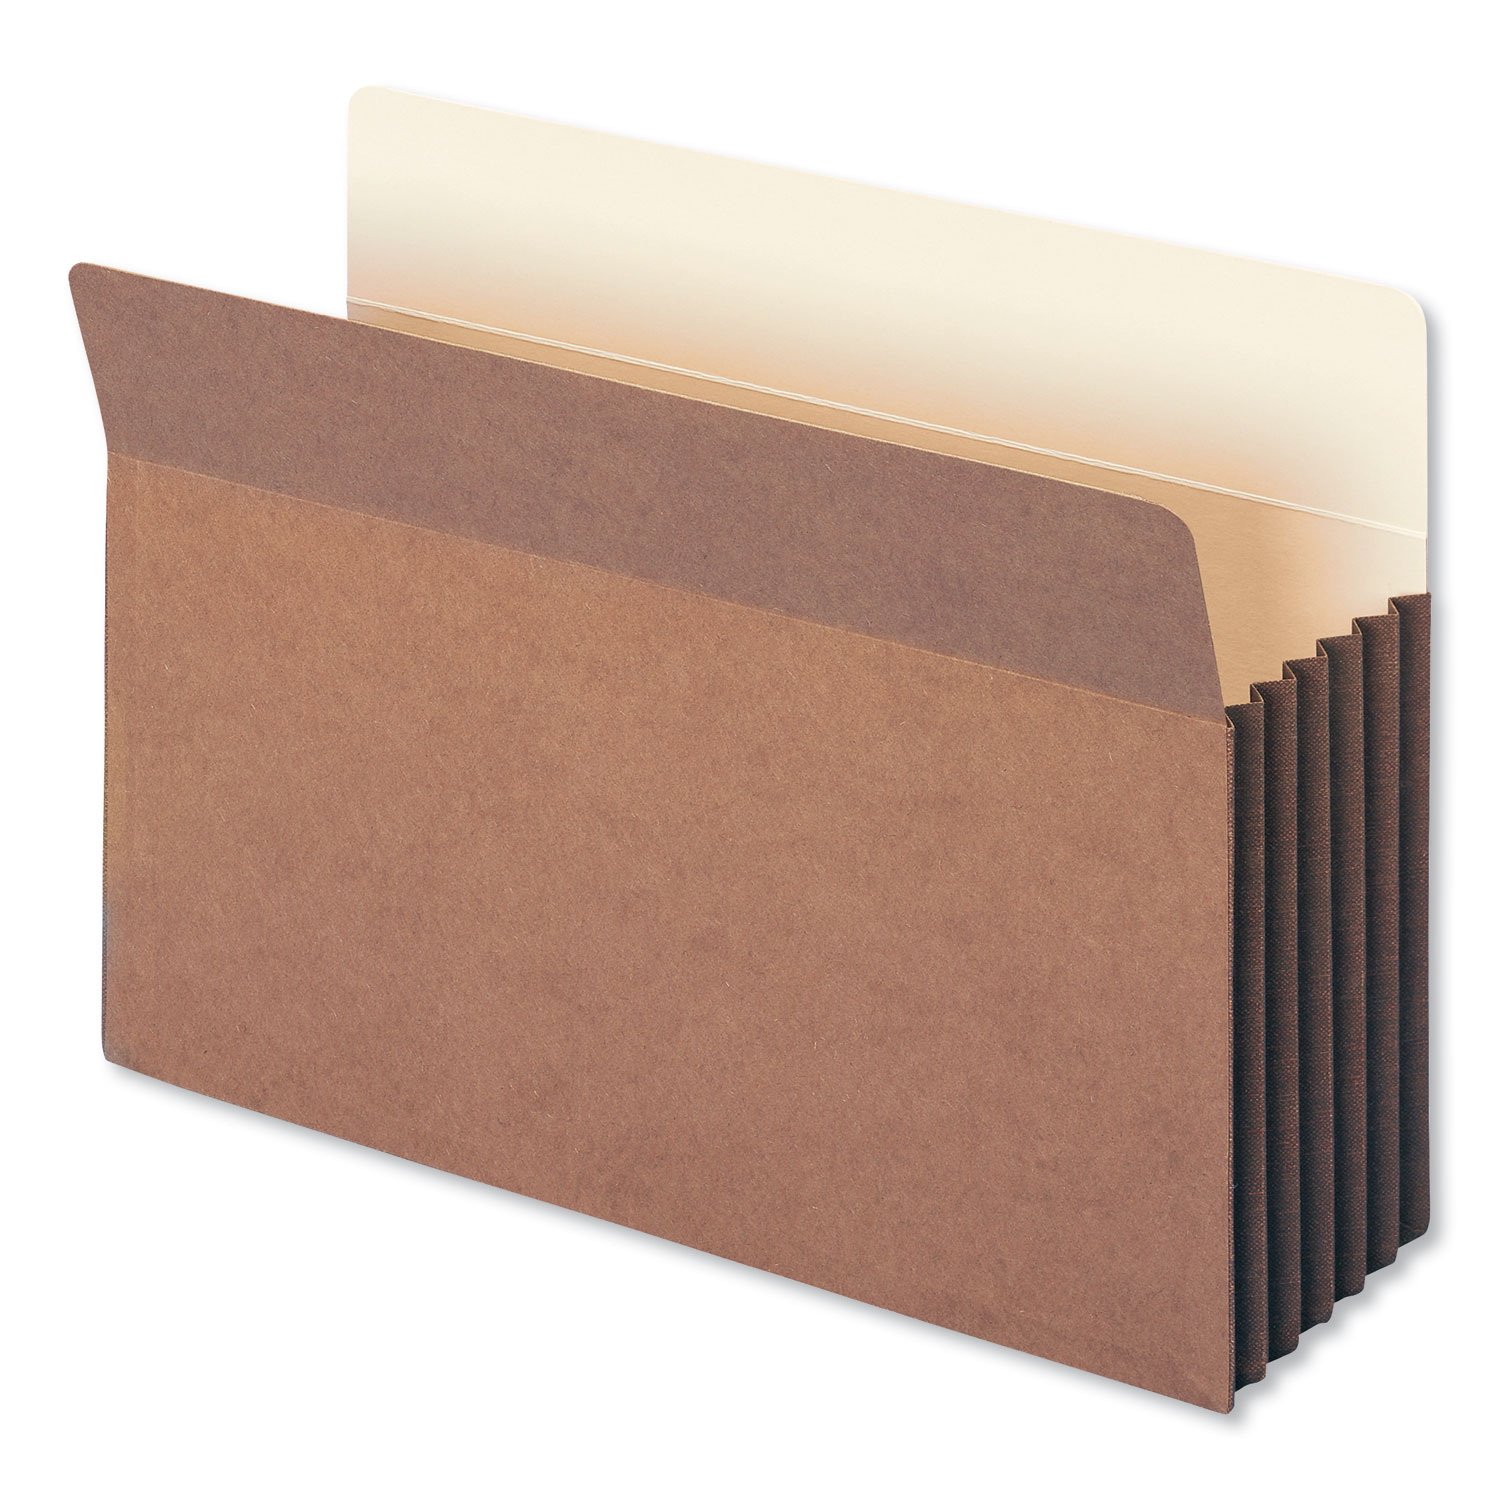  Smead 74274 Redrope Drop-Front File Pockets w/ Fully Lined Gussets, 5.25 Expansion, Legal Size, Redrope, 10/Box (SMD74274) 